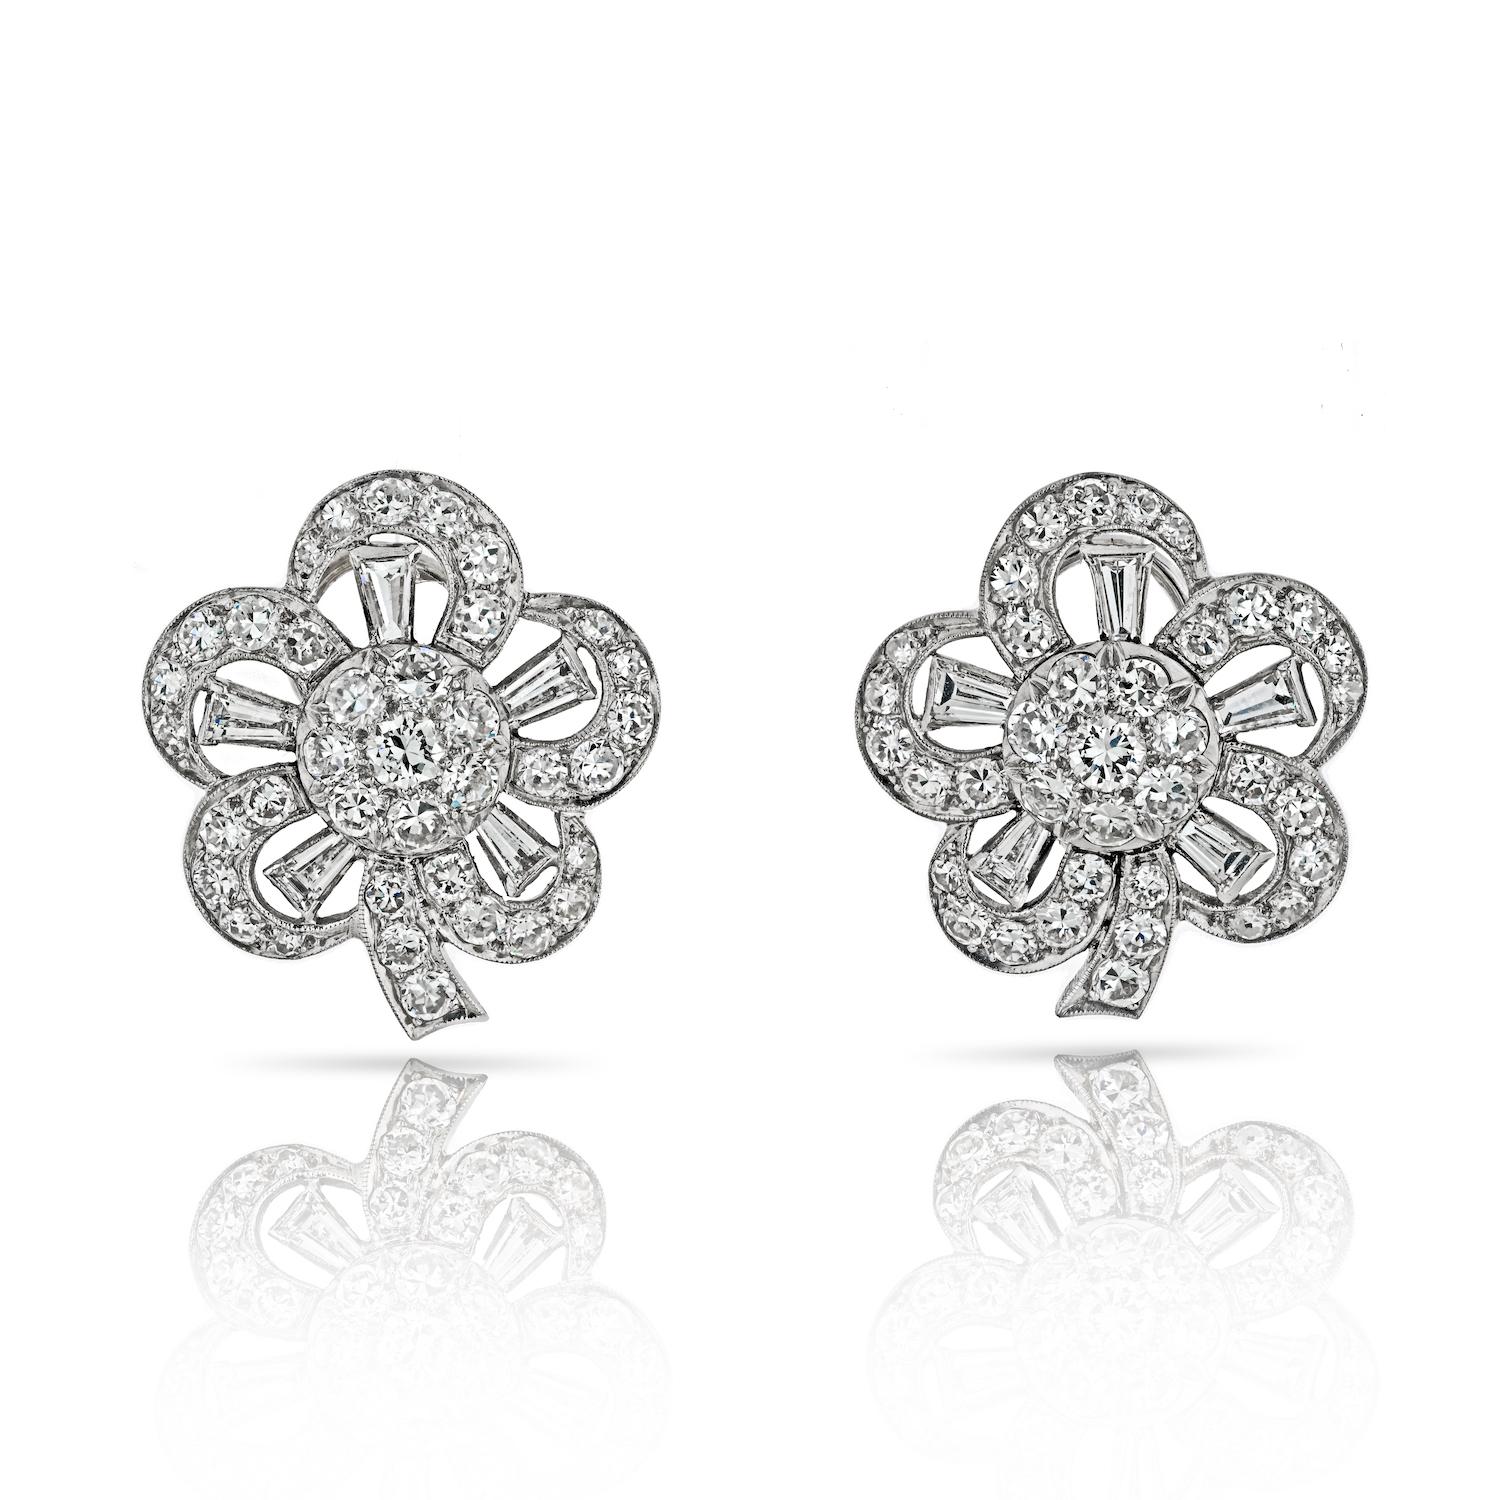 Indulge in the timeless allure of these Retro Platinum Diamond Flower Clip Earrings—a captivating blend of vintage charm and sophisticated design. Skillfully crafted in platinum, these earrings showcase an arrangement of baguette and old-cut